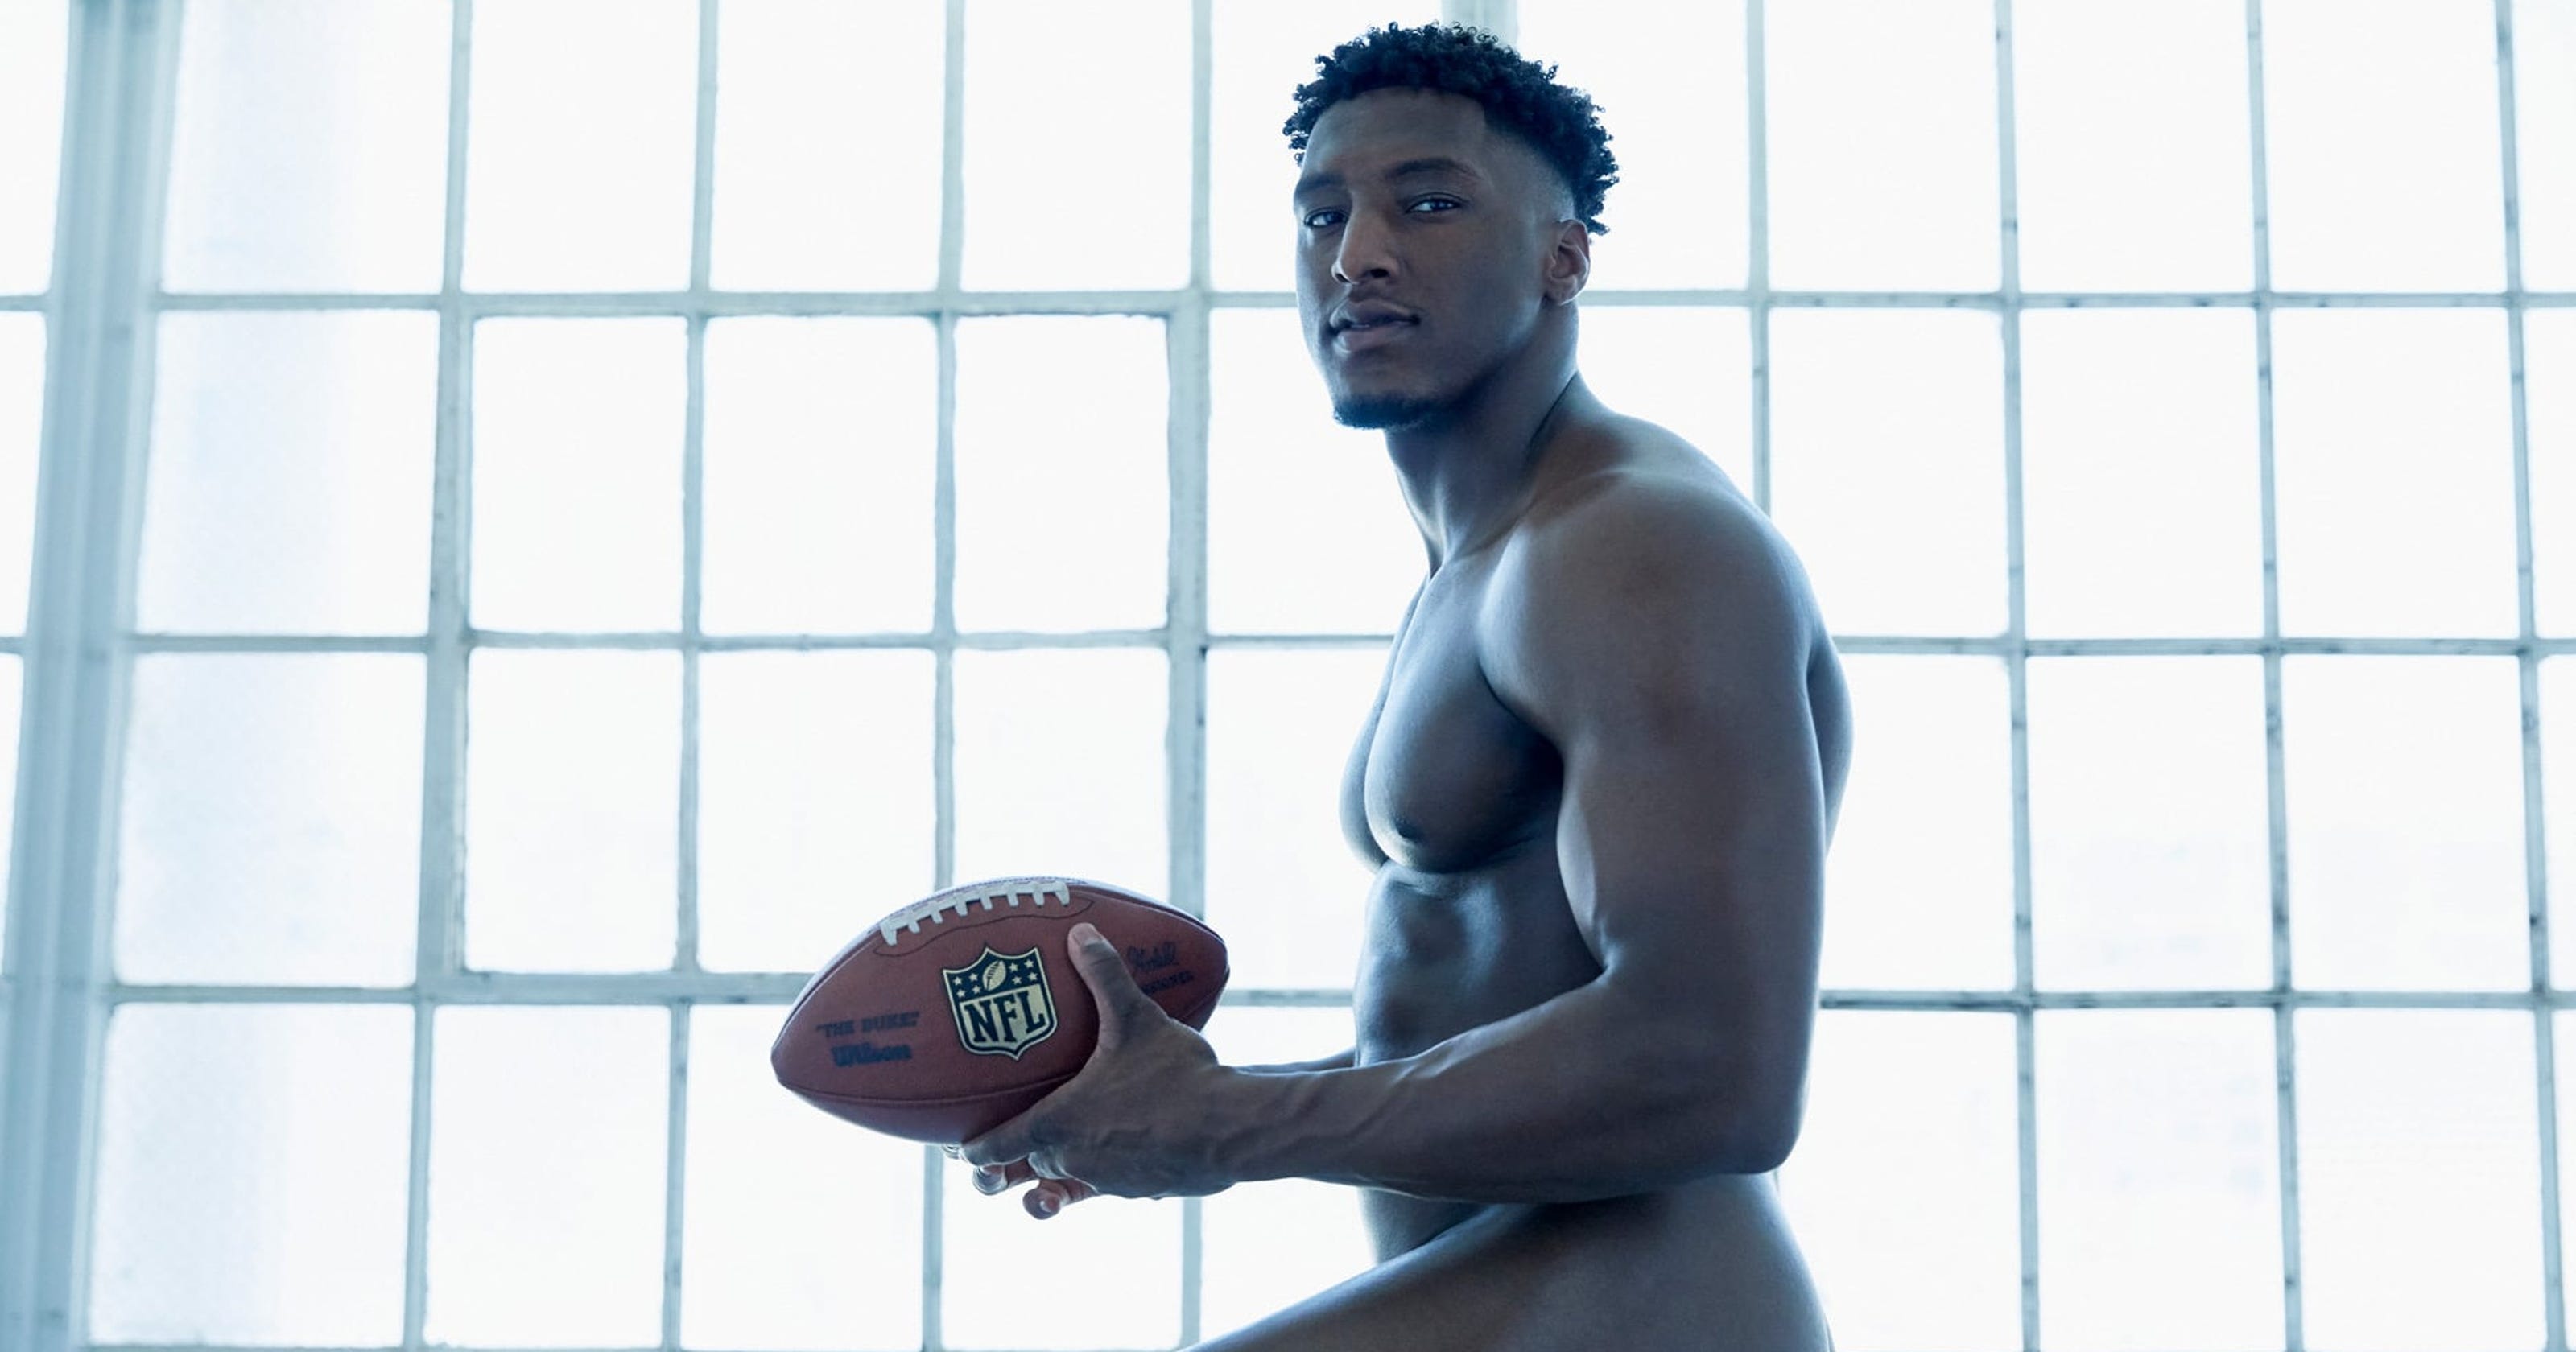 ESPN’s ‘Body Issue’ comes out this week. Here are all 21 athletes